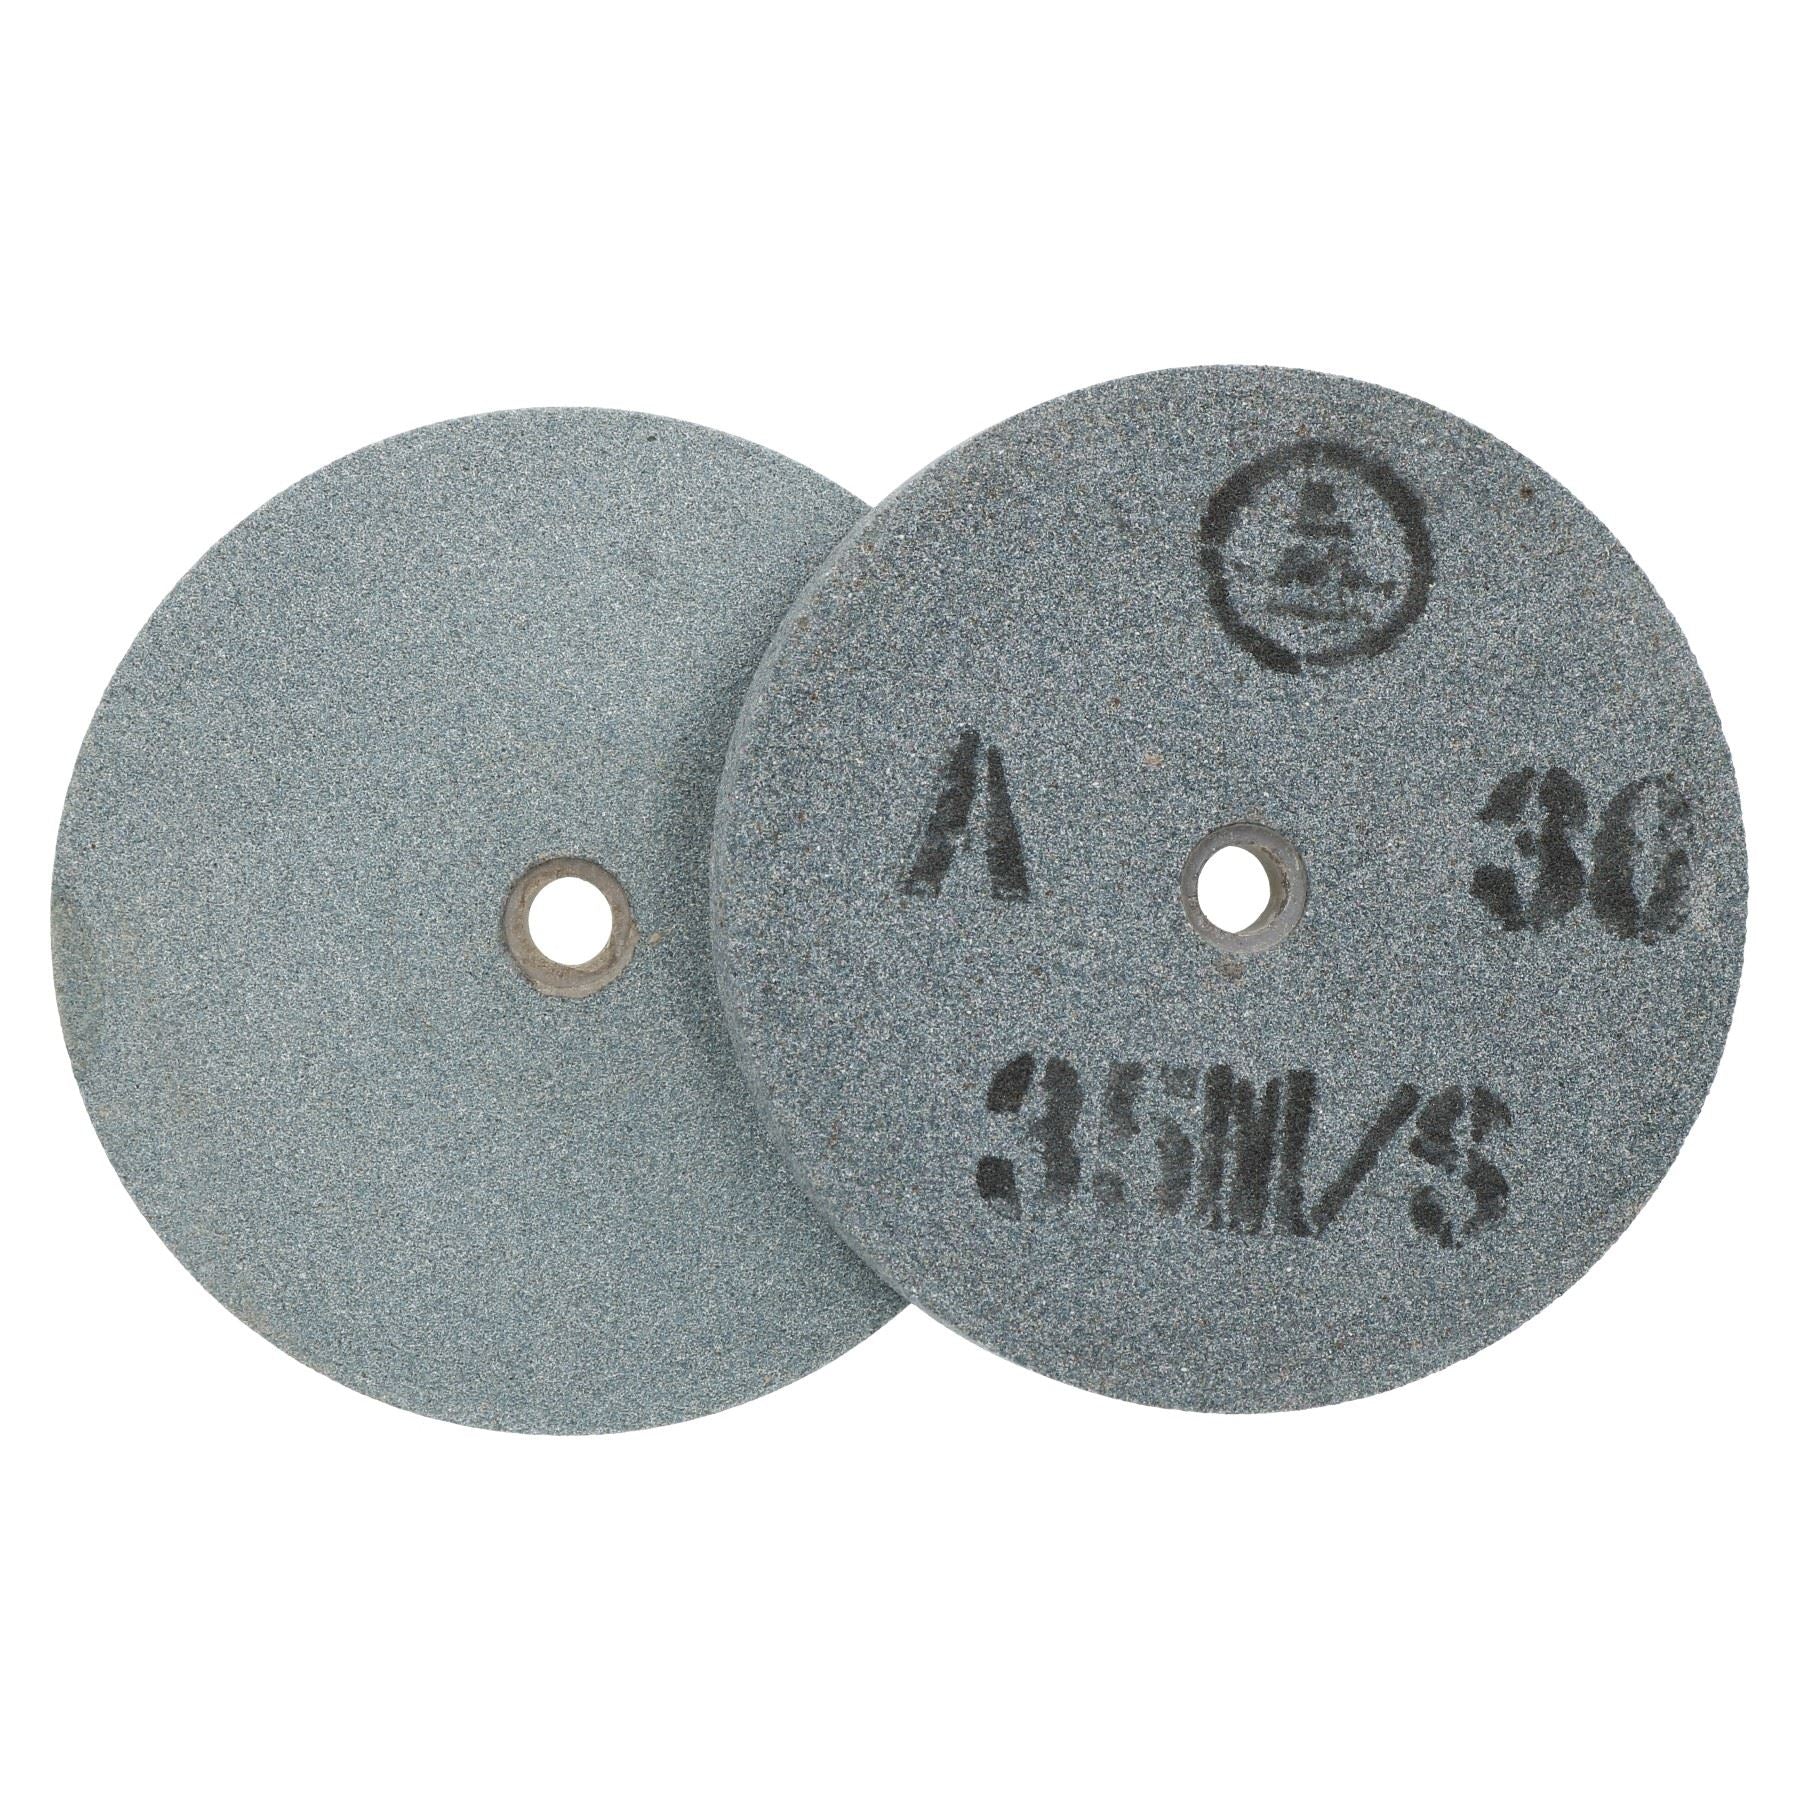 6" 150mm Bench Grinder Grinding Discs Wheels 36 (coarse) and 60 (fine) Grit 2pc